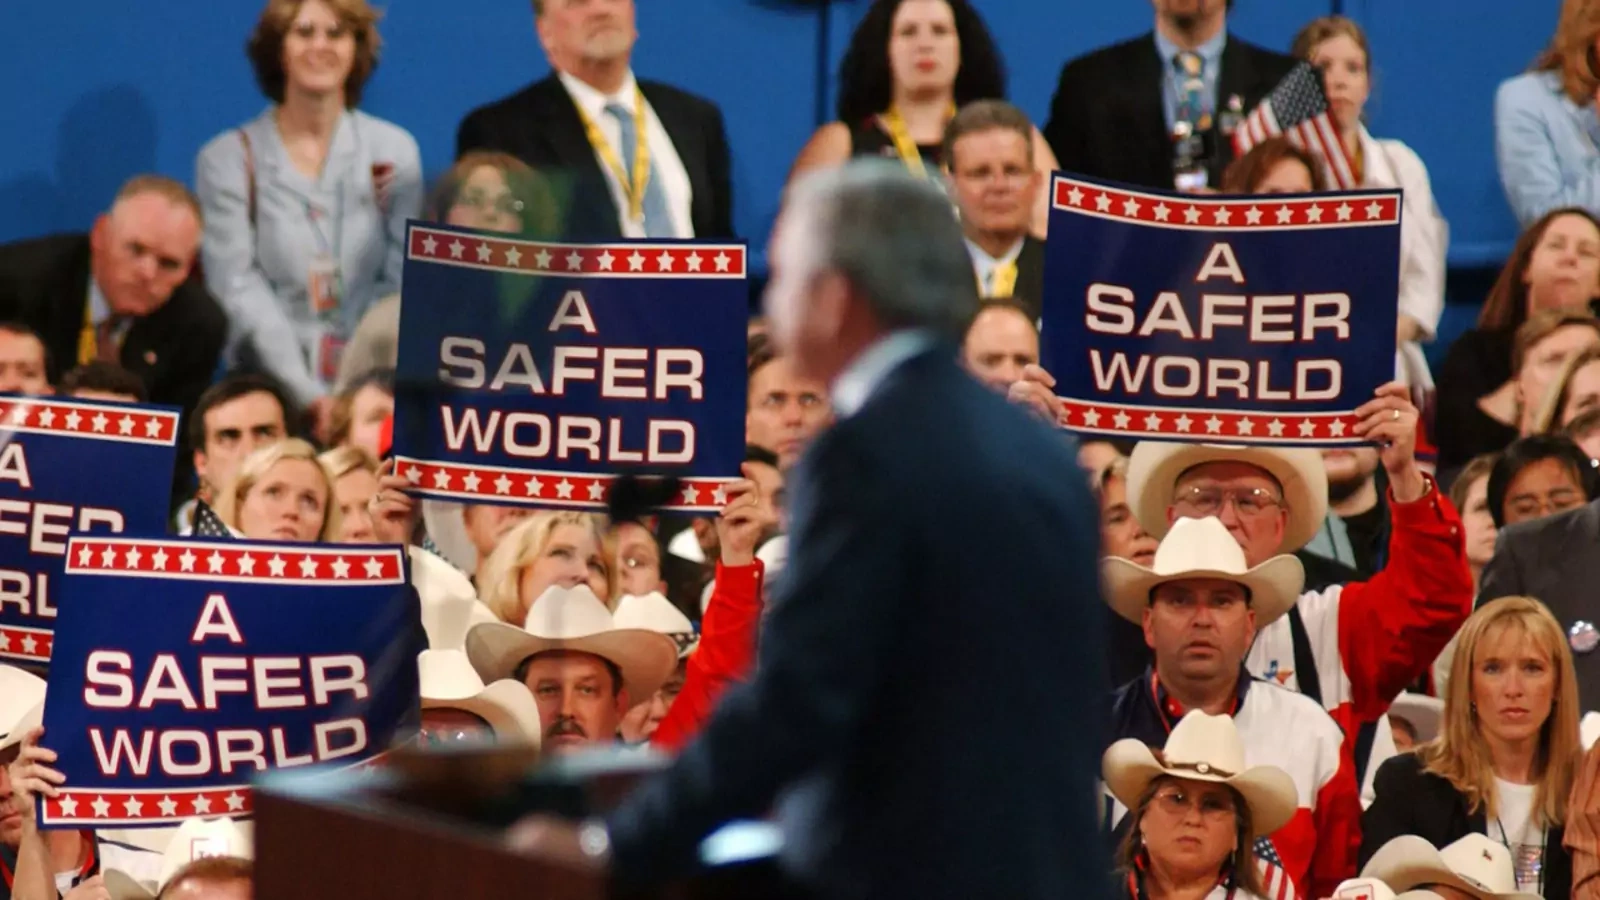 President George W. Bush addresses delegates at the Republican National Convention in New York City, September 2004.